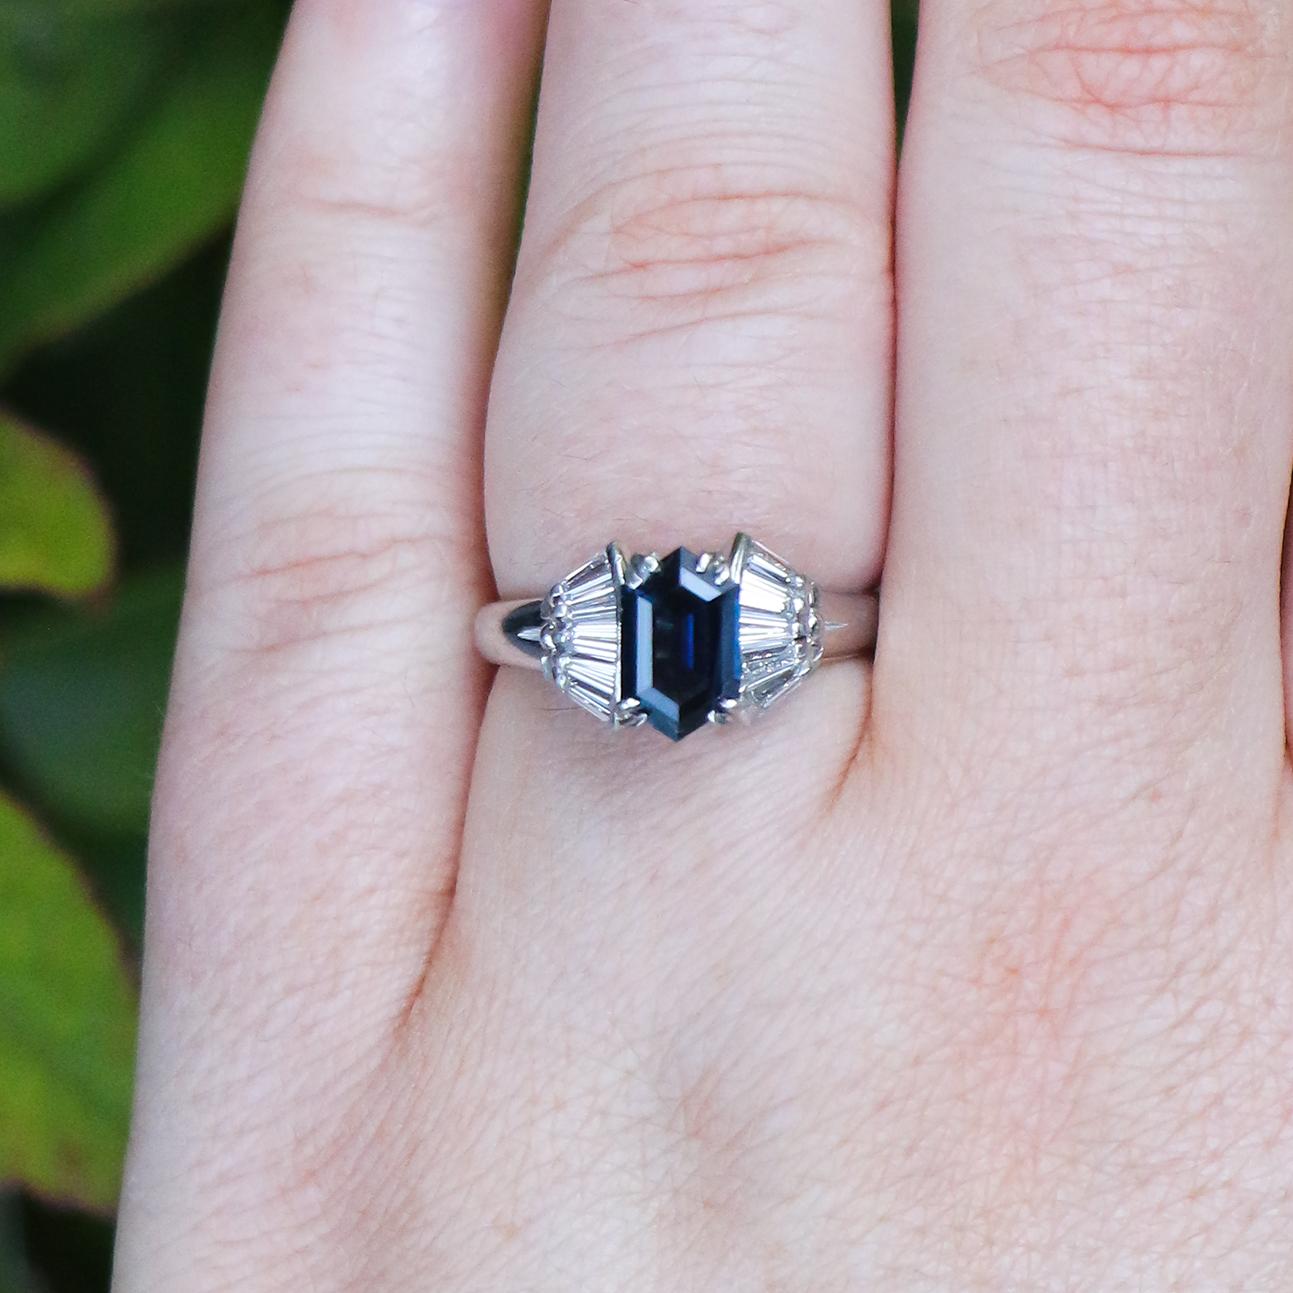 This ring displays a beautiful 1.40 carat Montana sapphire flanked by diamonds, the prongs hold the stone in place with minimal interruption. Its platinum band aids its uniqueness and rarity making this piece a statement for all that wear it.

•